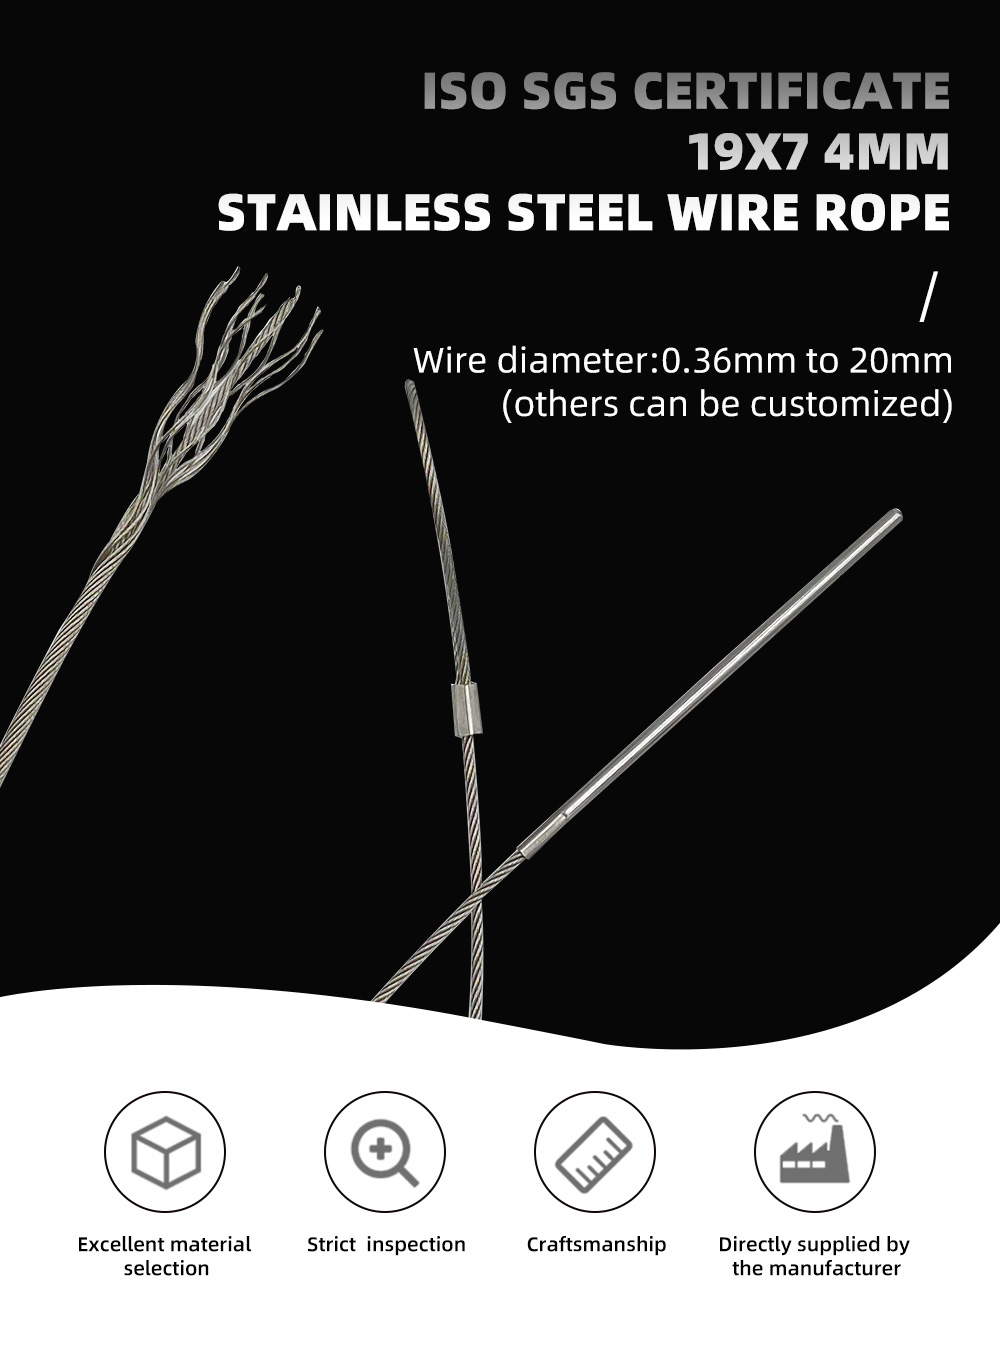 19X7-4mm-stainless steel wire rope_01